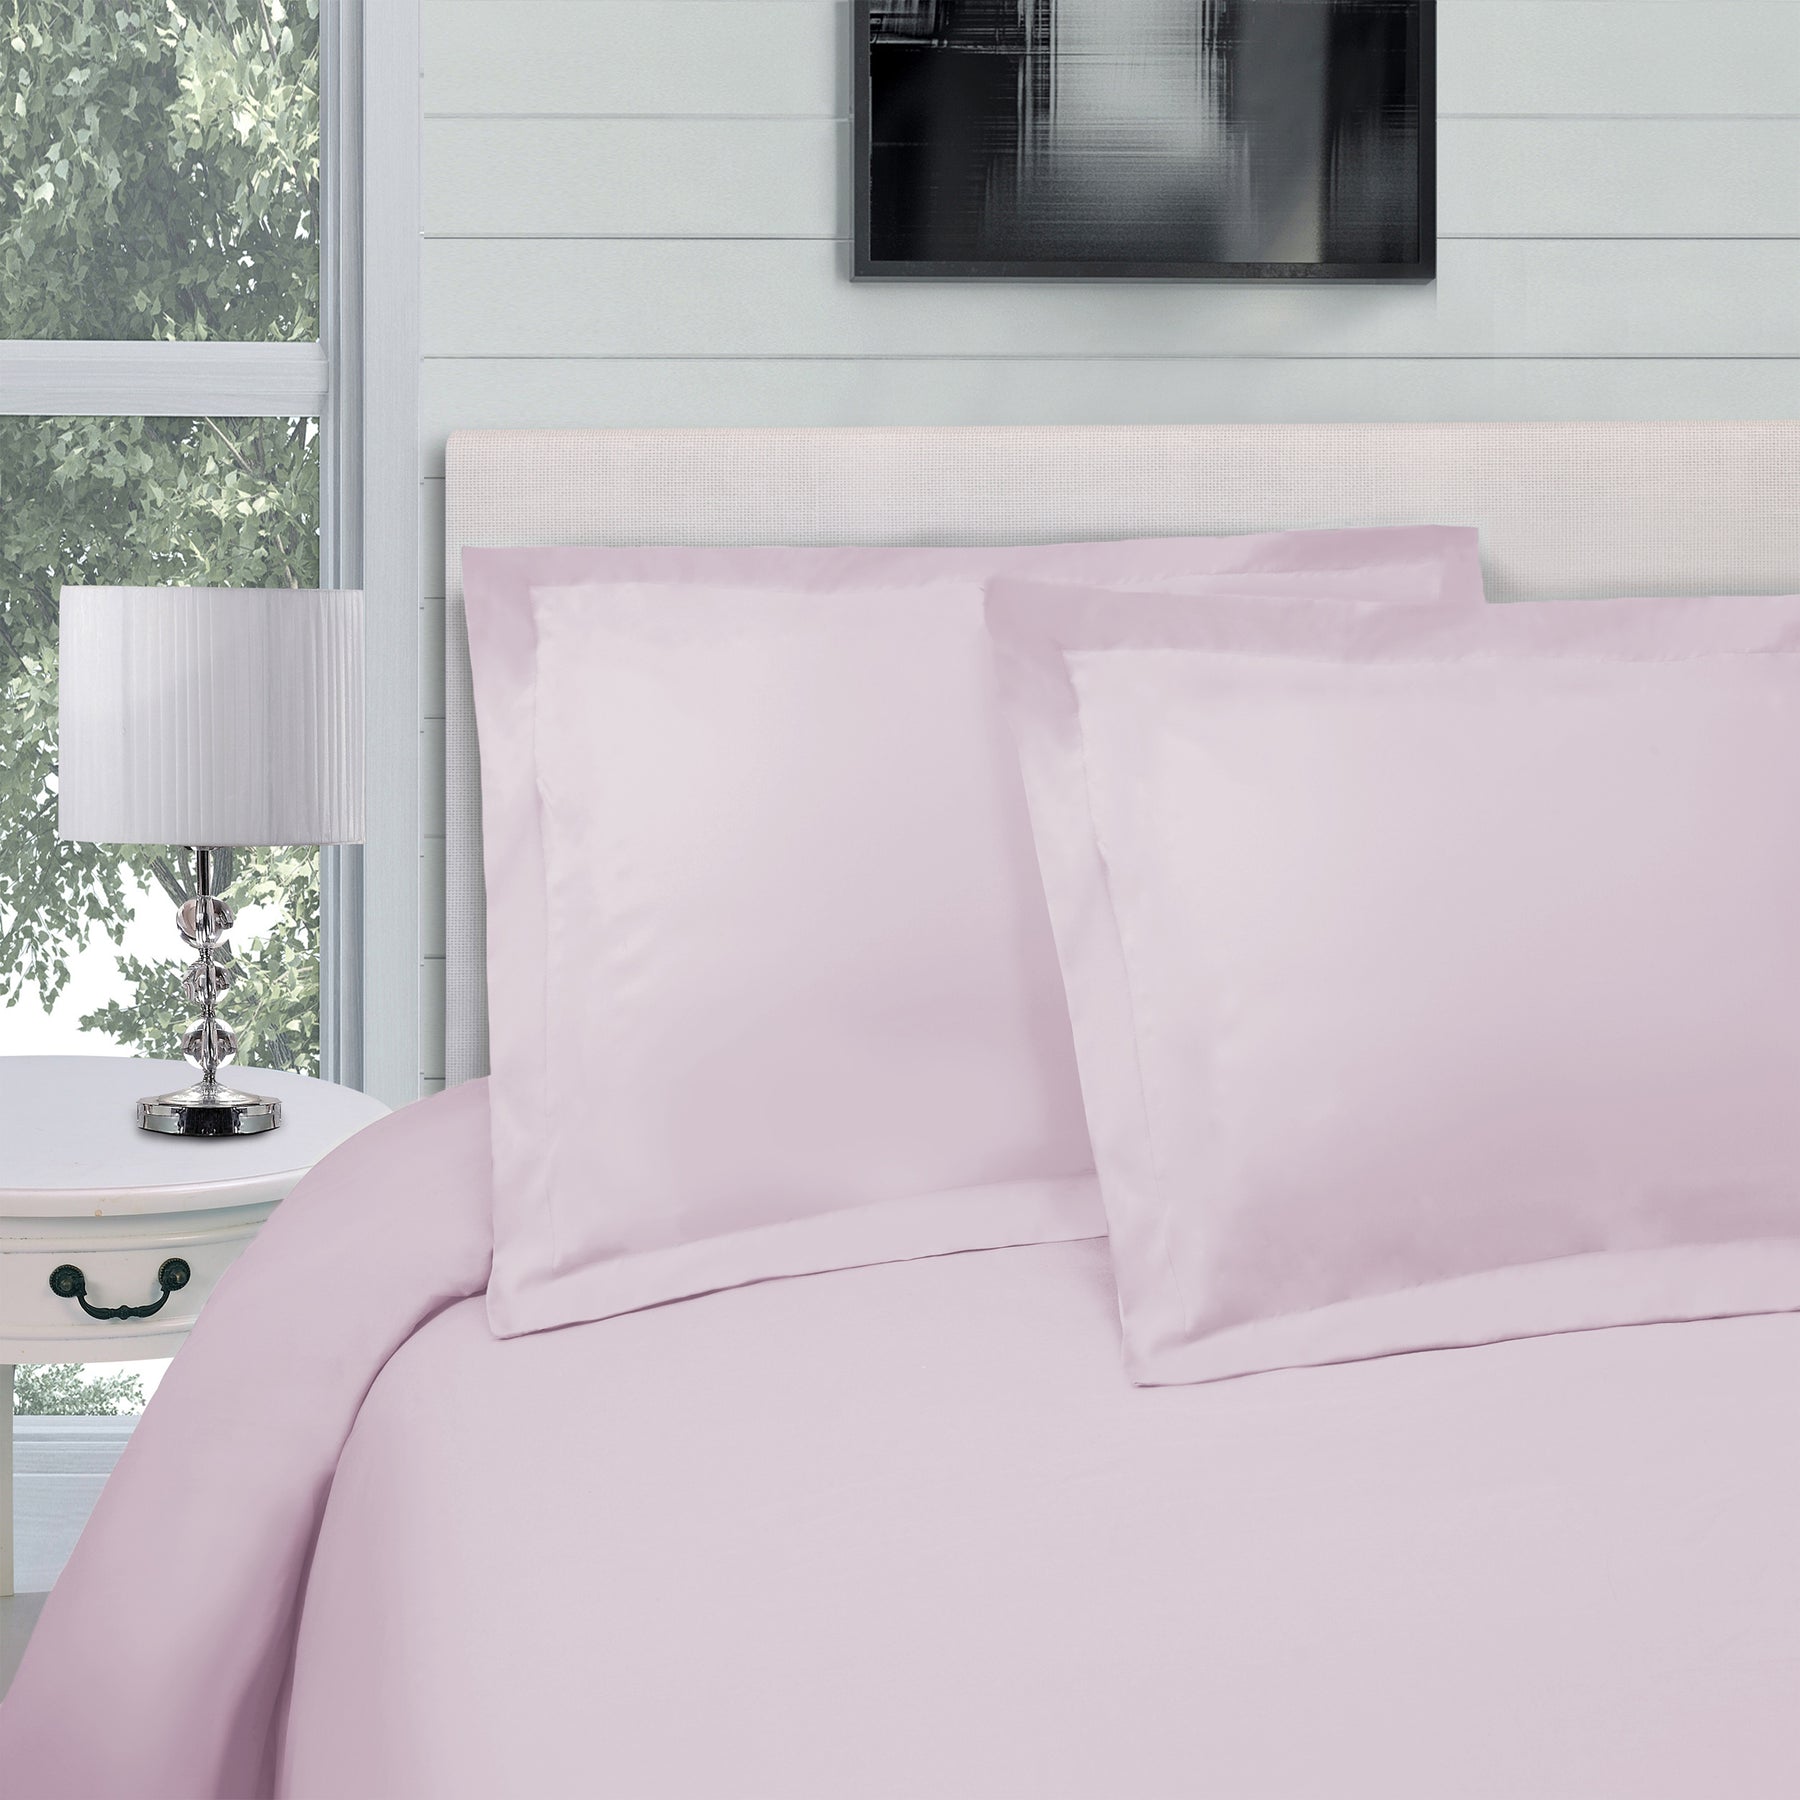 Superior Egyptian Cotton 300 Thread Count Solid Duvet Cover Set -  Lilac